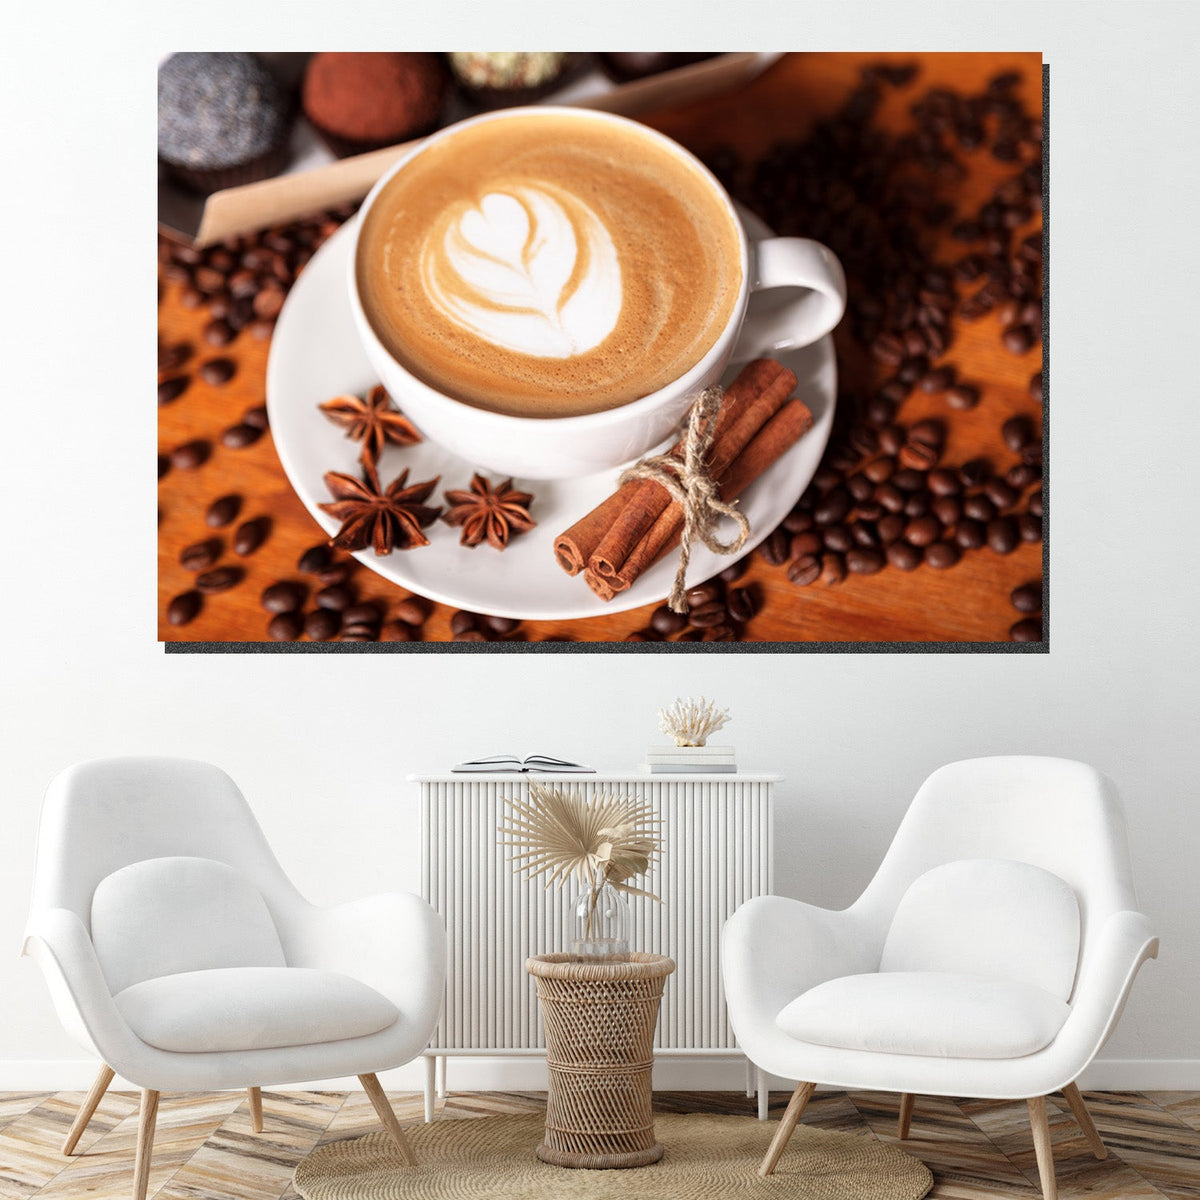 https://cdn.shopify.com/s/files/1/0387/9986/8044/products/SpiceitupwithCoffeeCanvasArtprintStretched-3.jpg